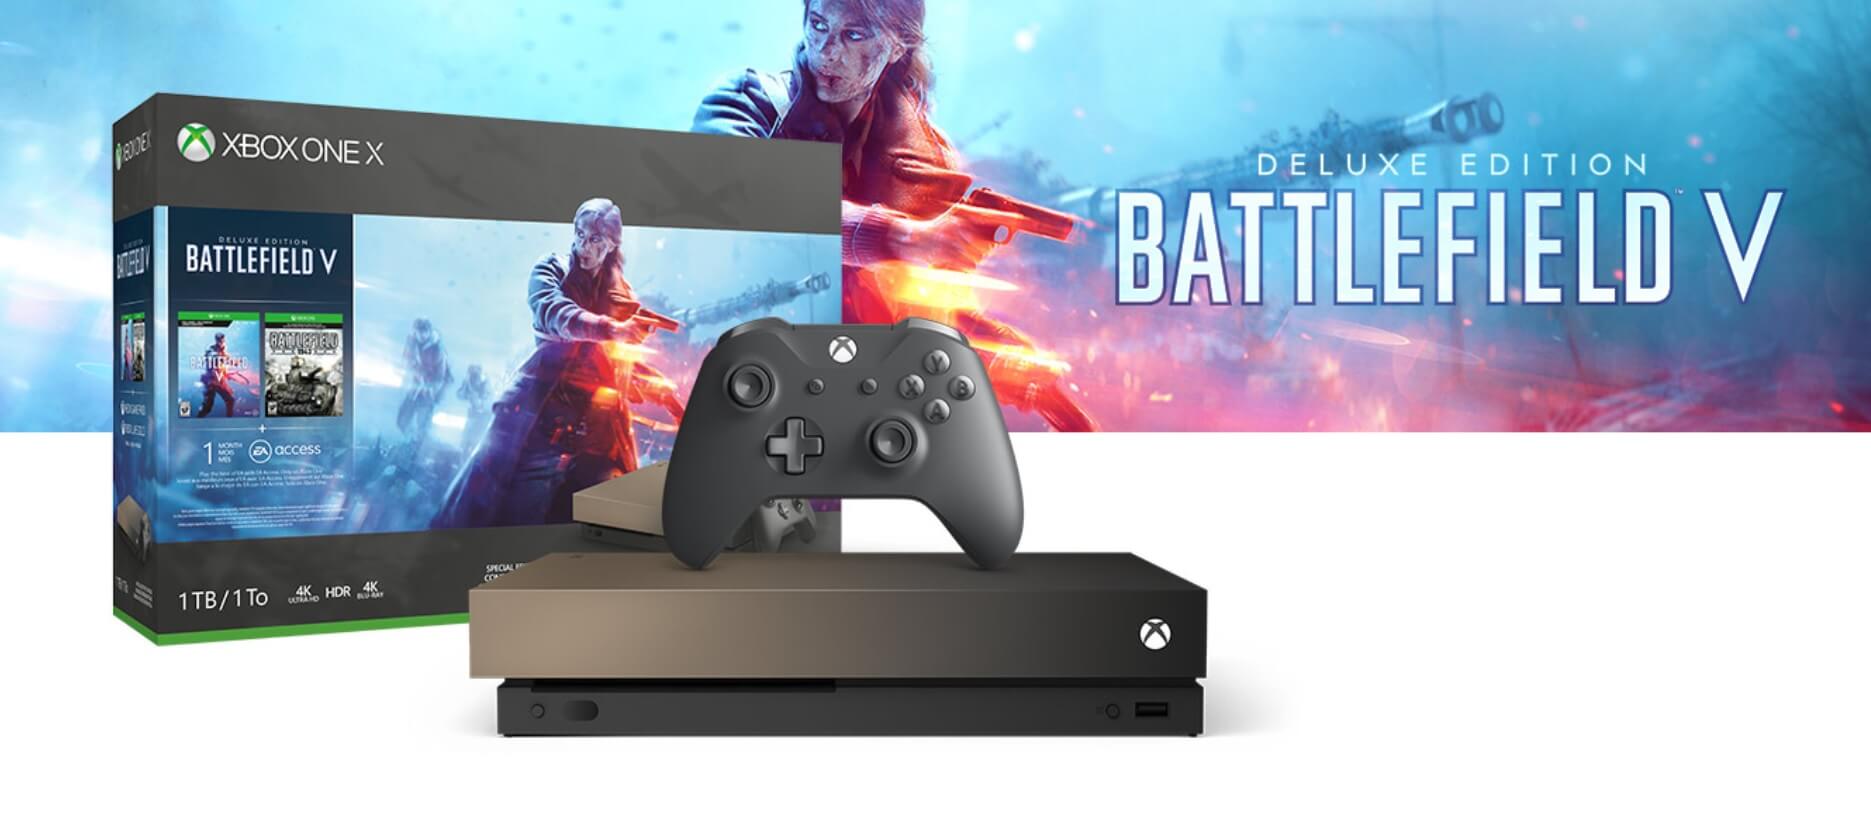  Xbox One X Gold Rush Special Edition Battlefield V